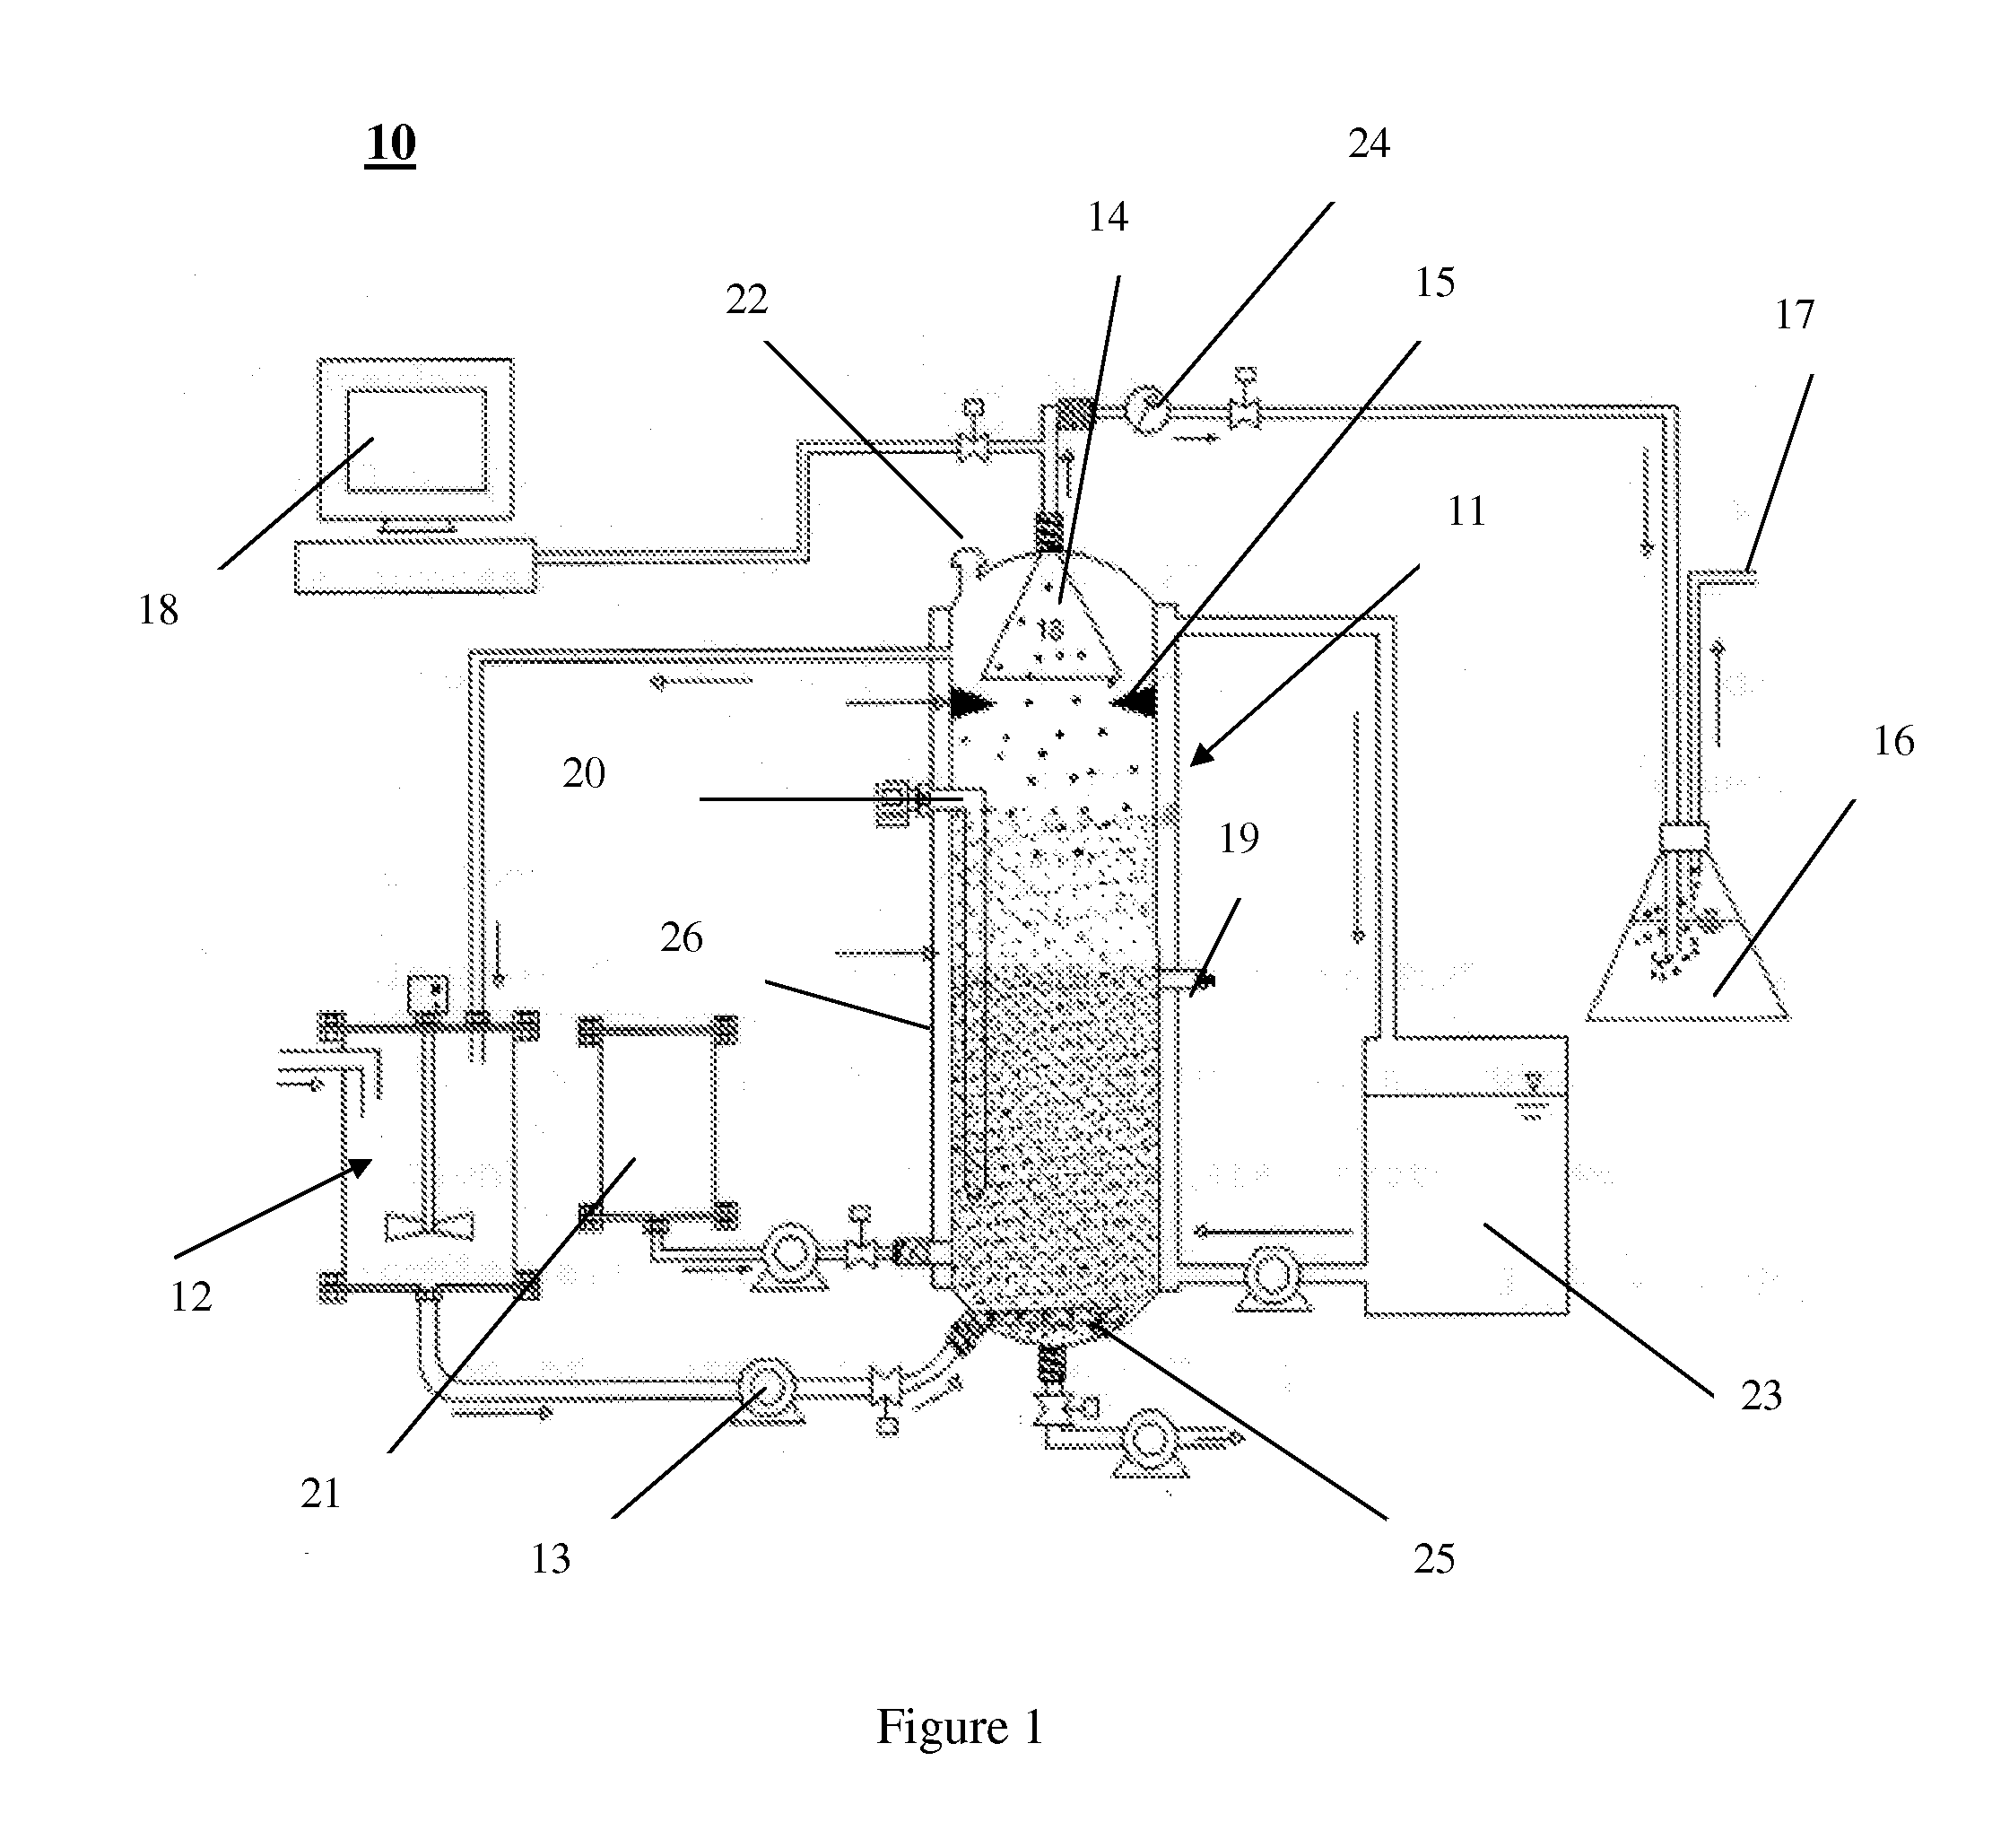 Method for use in palm oil mill effluent (POME) treatment